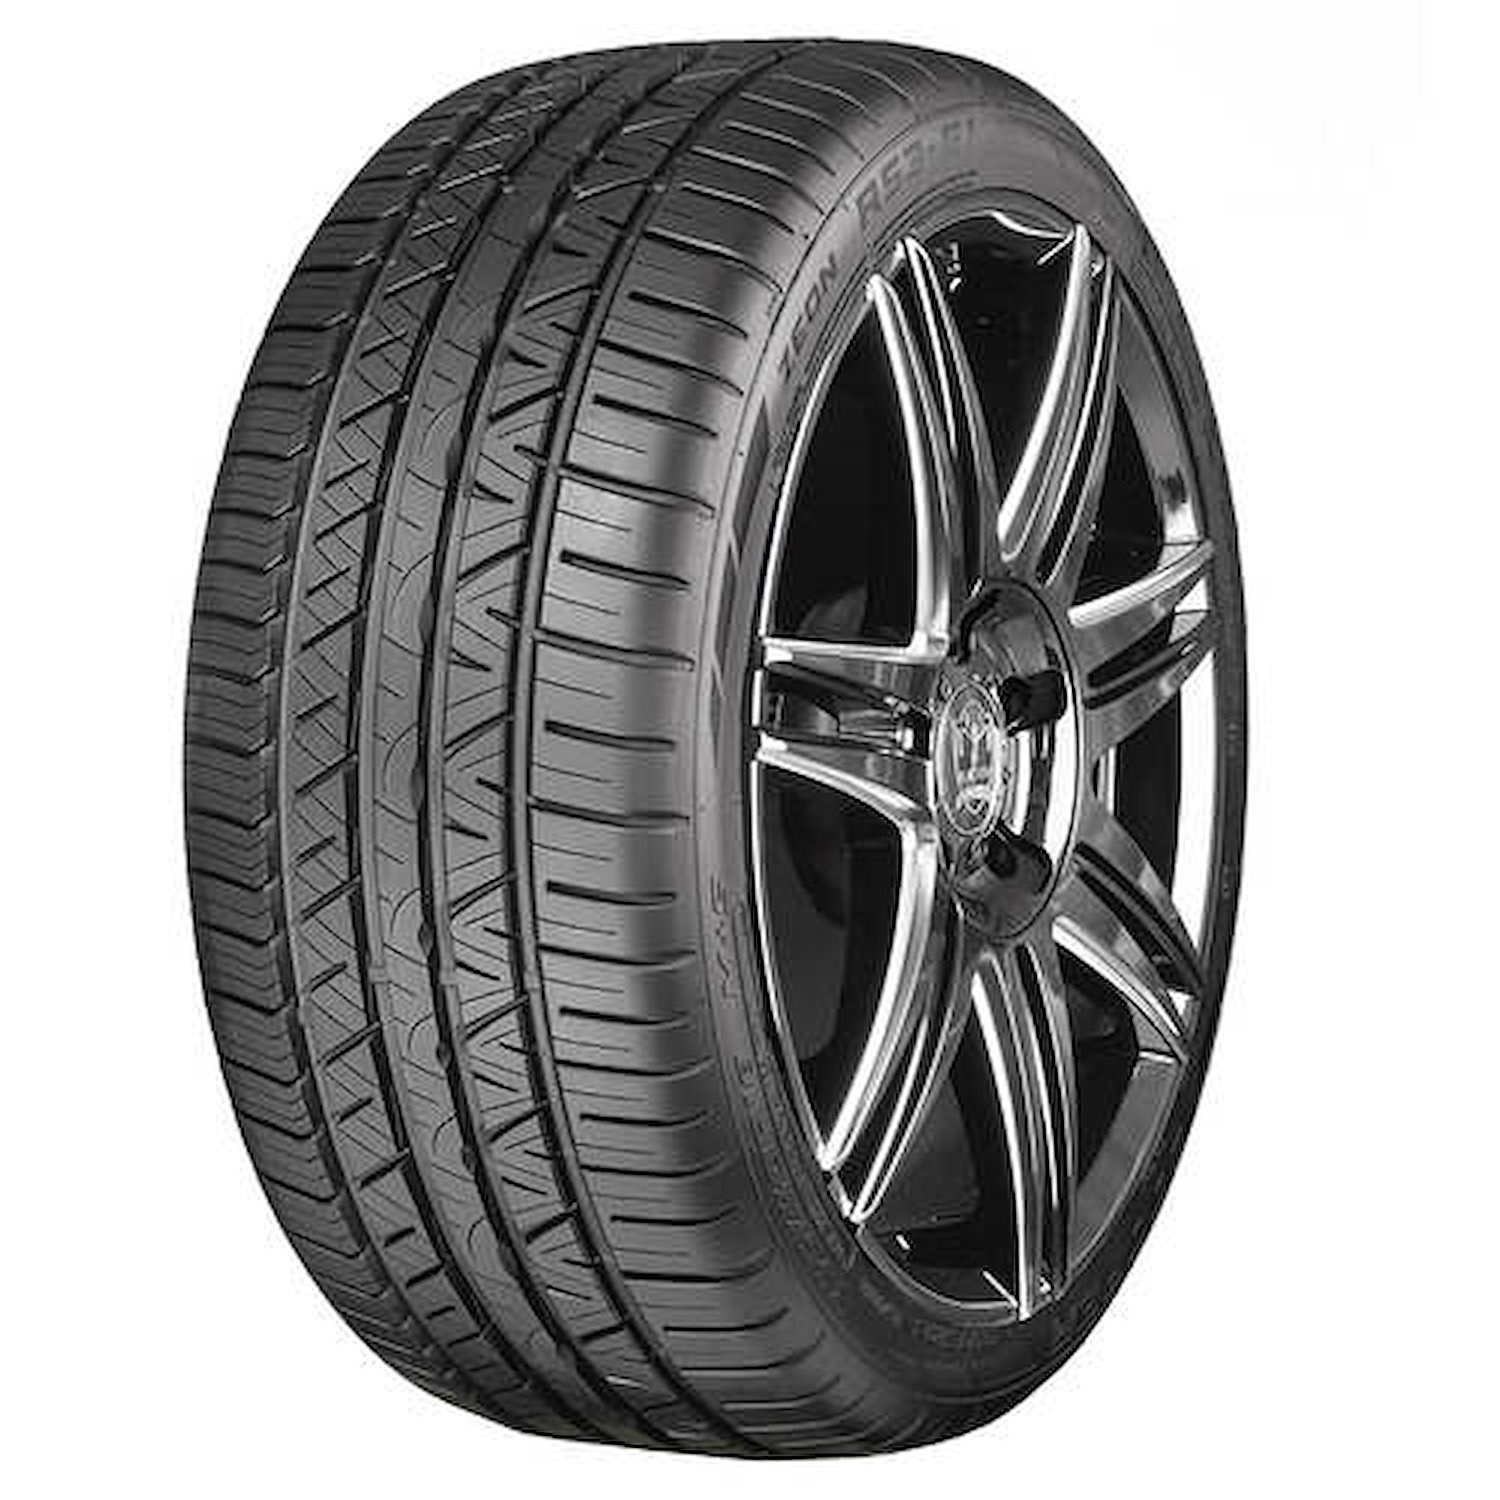 Zeon RS3-G1 High-Performance Tire, 225/50R17